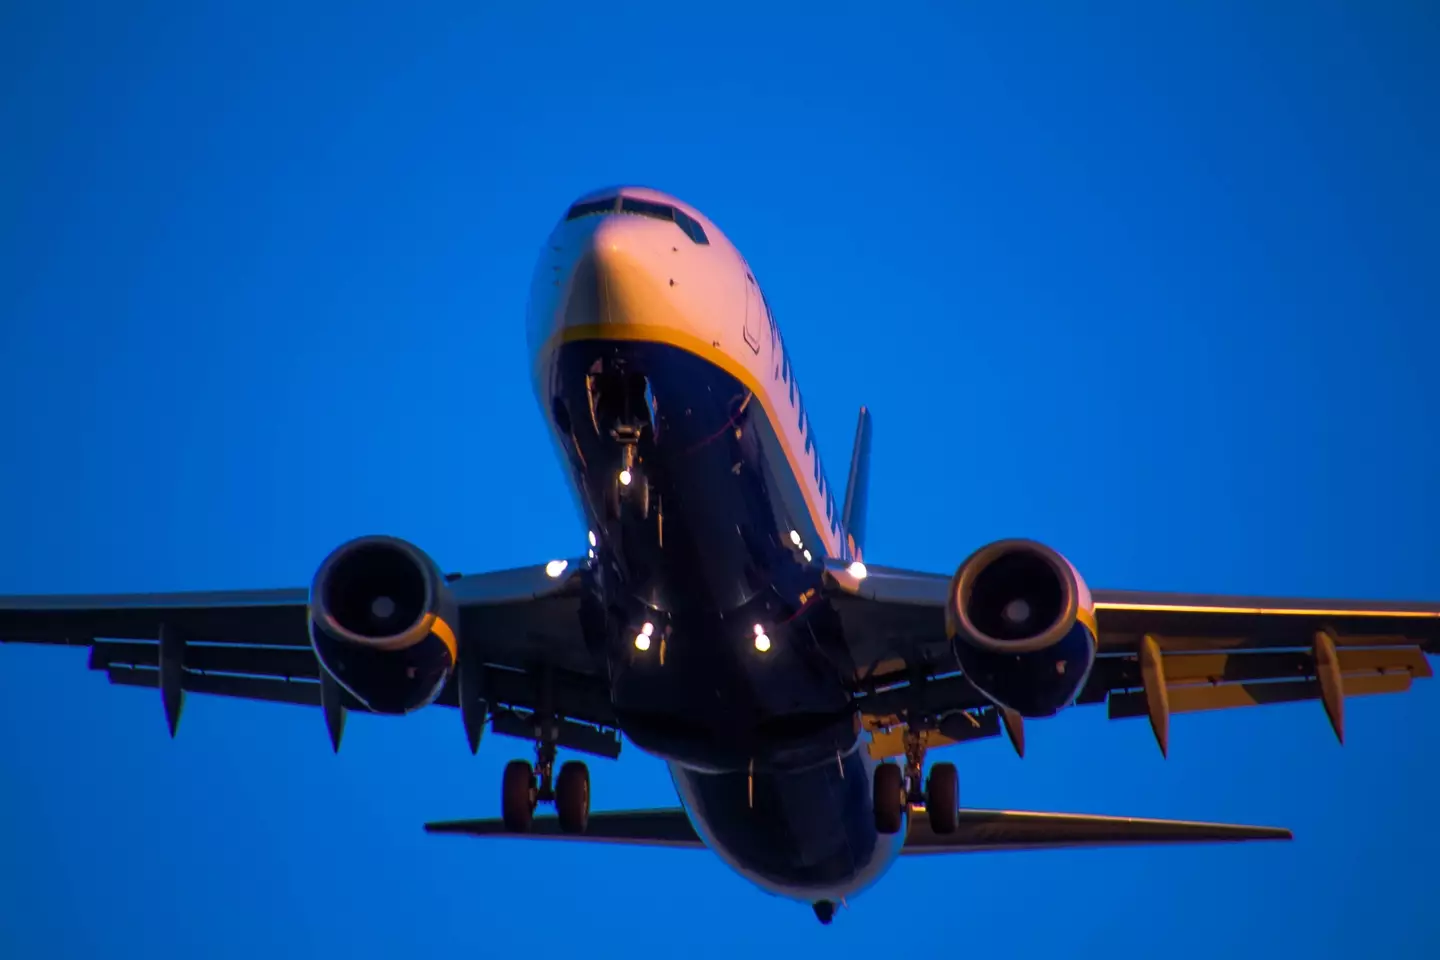 Ryanair has extended its flash sale until midnight.